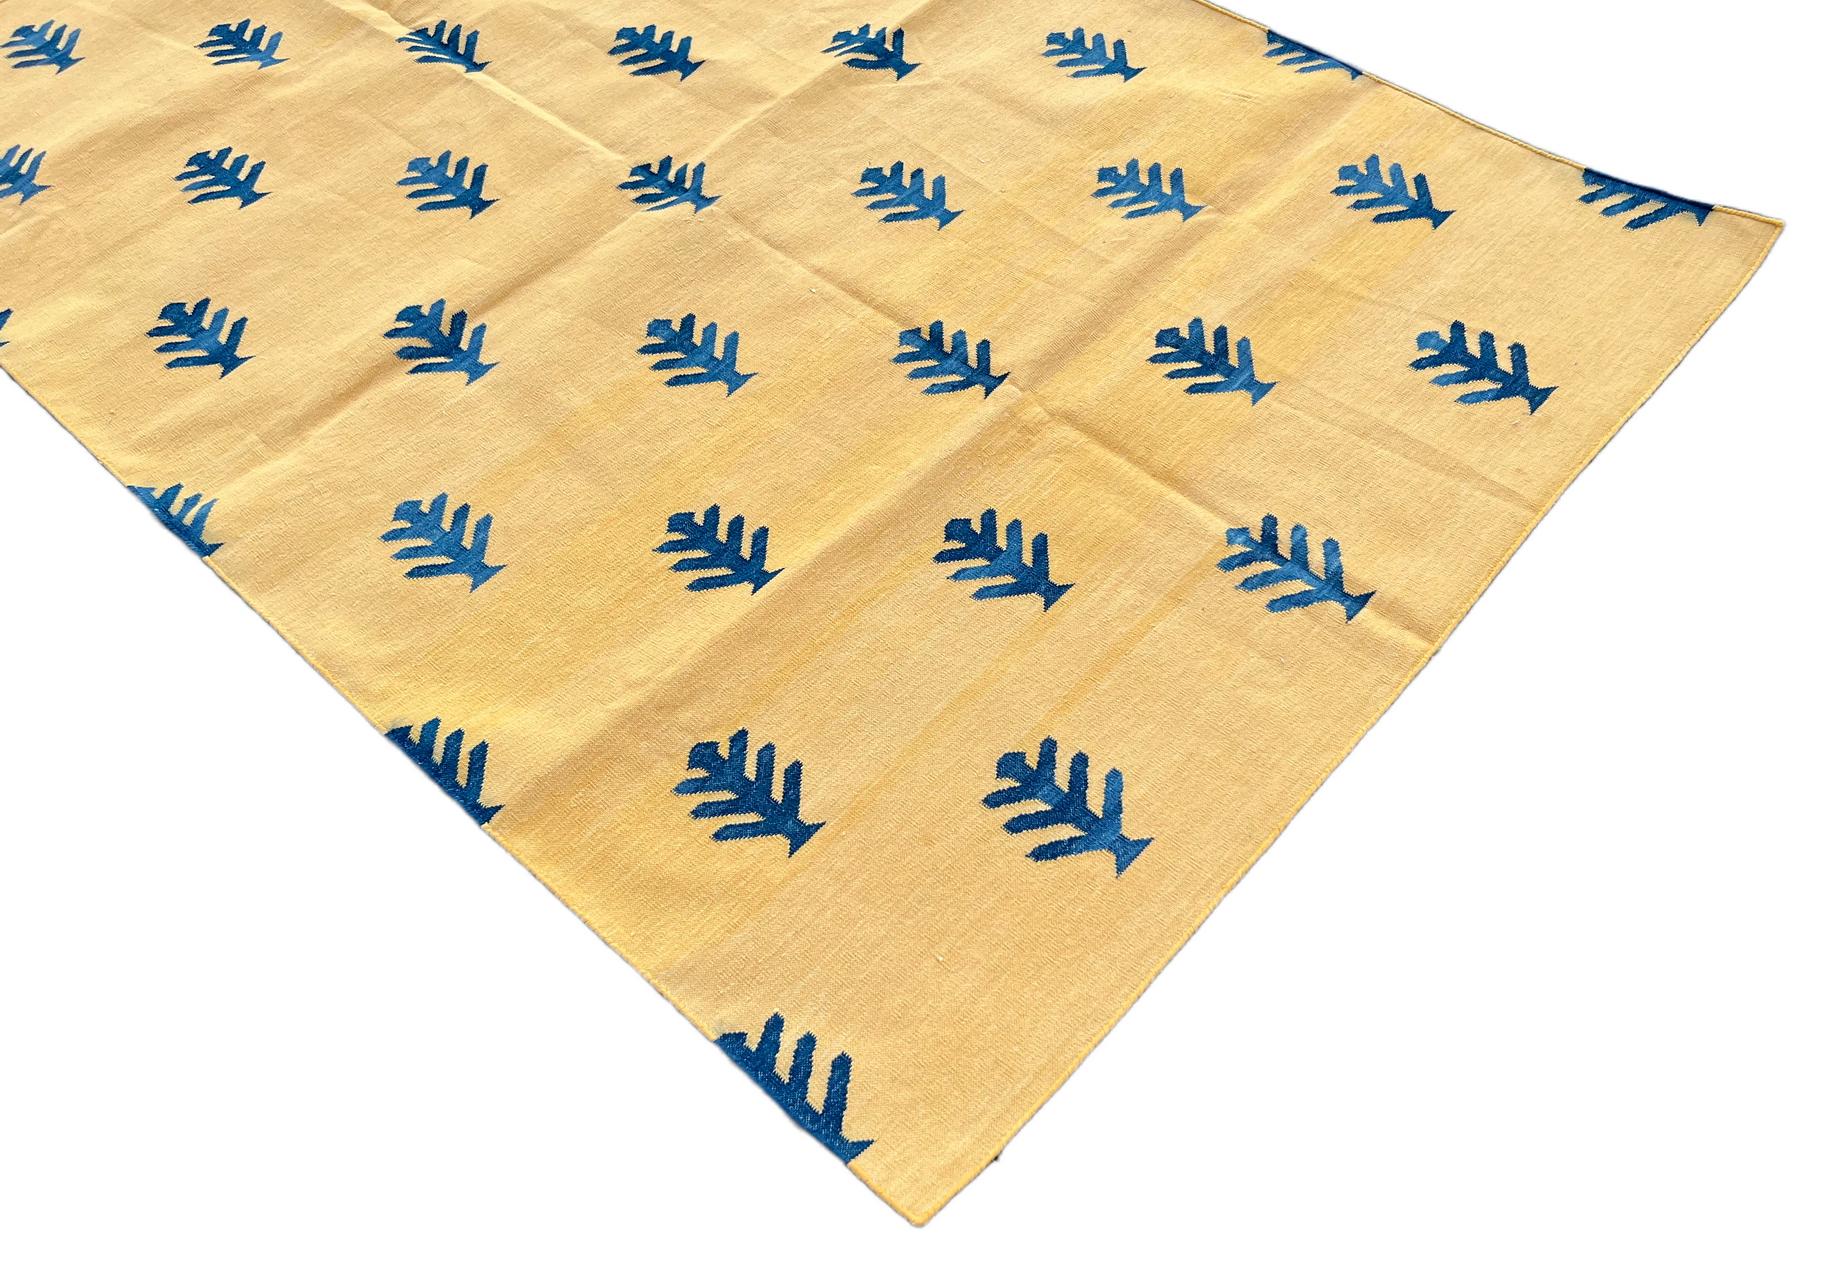 Hand-Woven Handmade Cotton Area Flat Weave Rug, Yellow & Blue Tree Patterned Indian Dhurrie For Sale